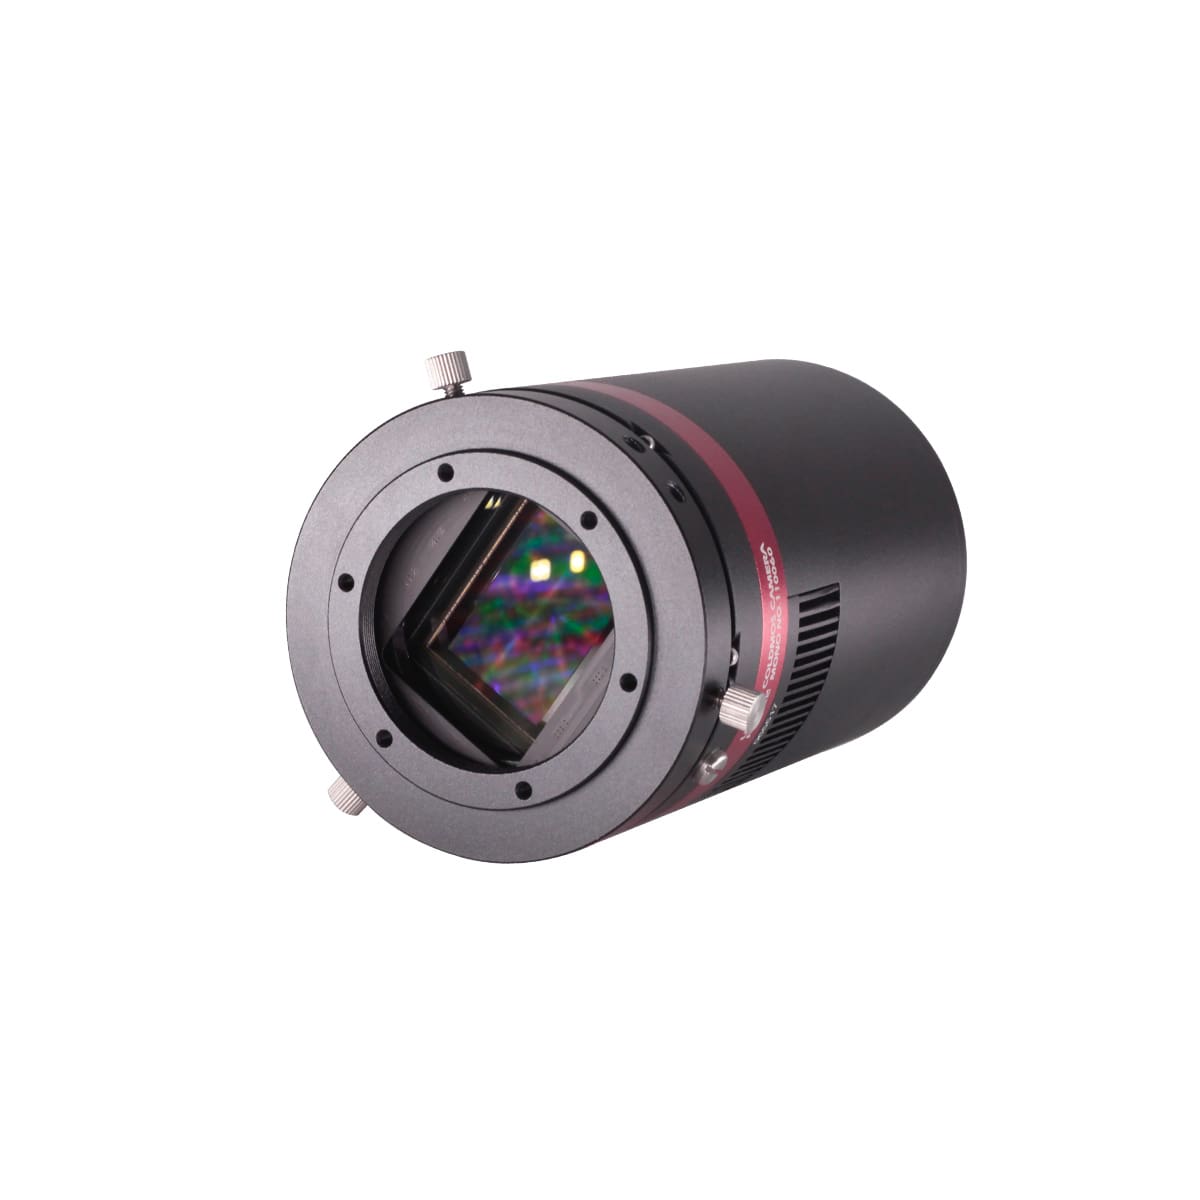 With the advantage of low readout noise and high-speed readout, CMOS technology has revolutionized astronomical imaging. A monochrome, back-illuminated, high-sensitivity, astronomical imaging camera is the ideal choice for astro-imagers. The QHY600 Series uses SONY  IMX455, a BSI full frame (35mm format) sensor with 3.76um pixels and native 16-bit A/D. 